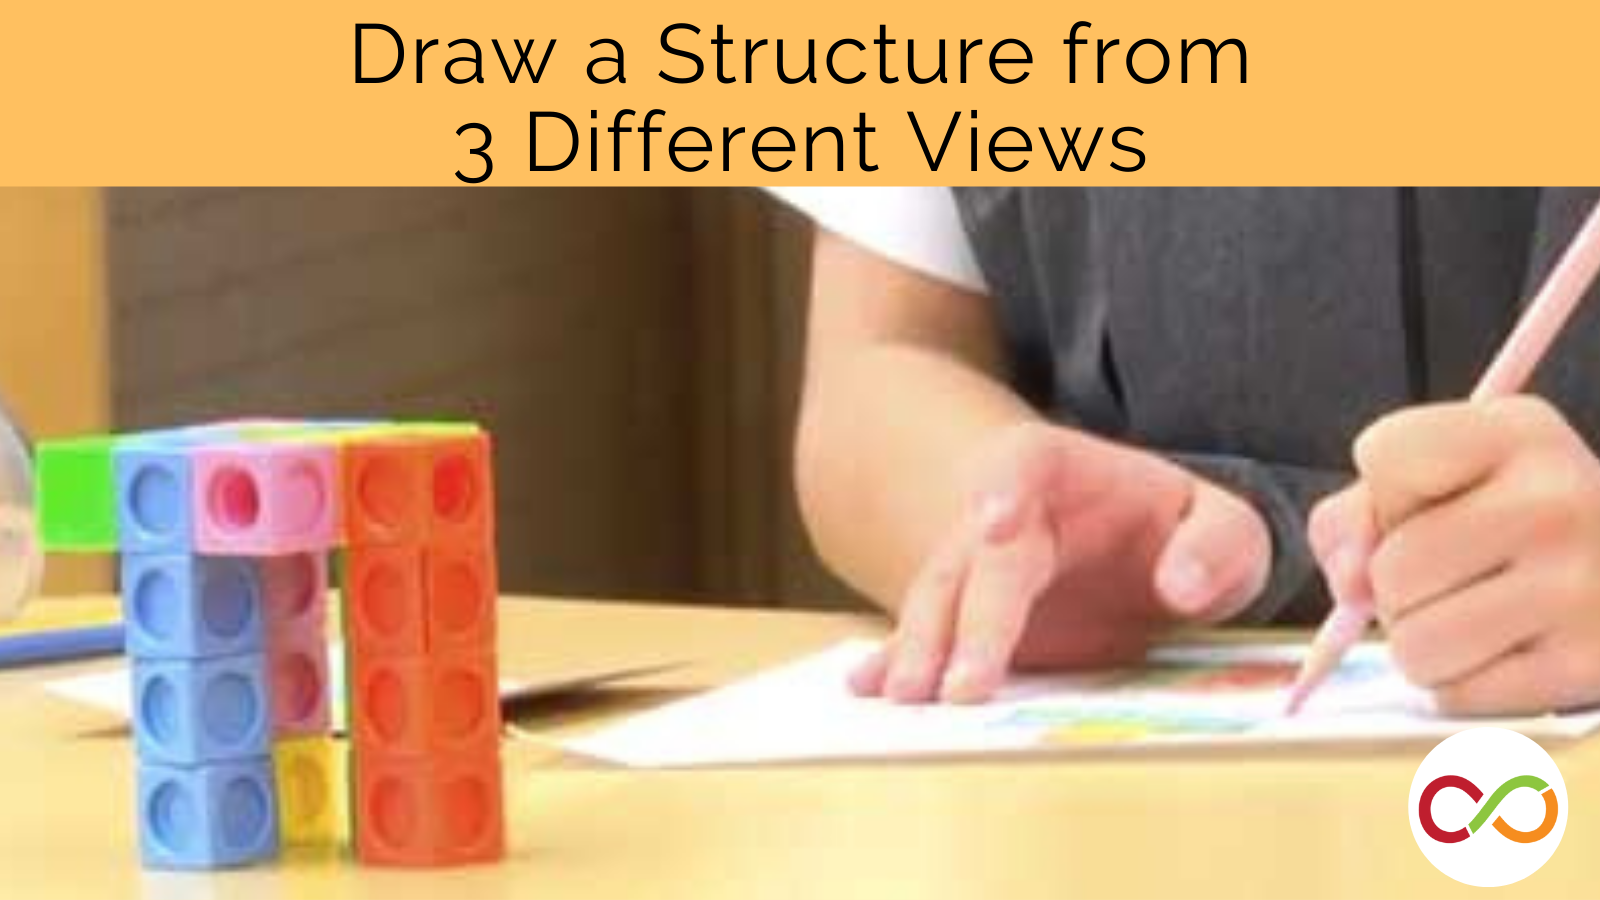 Feature image for Draw a Structure from 3 Different Views lesson